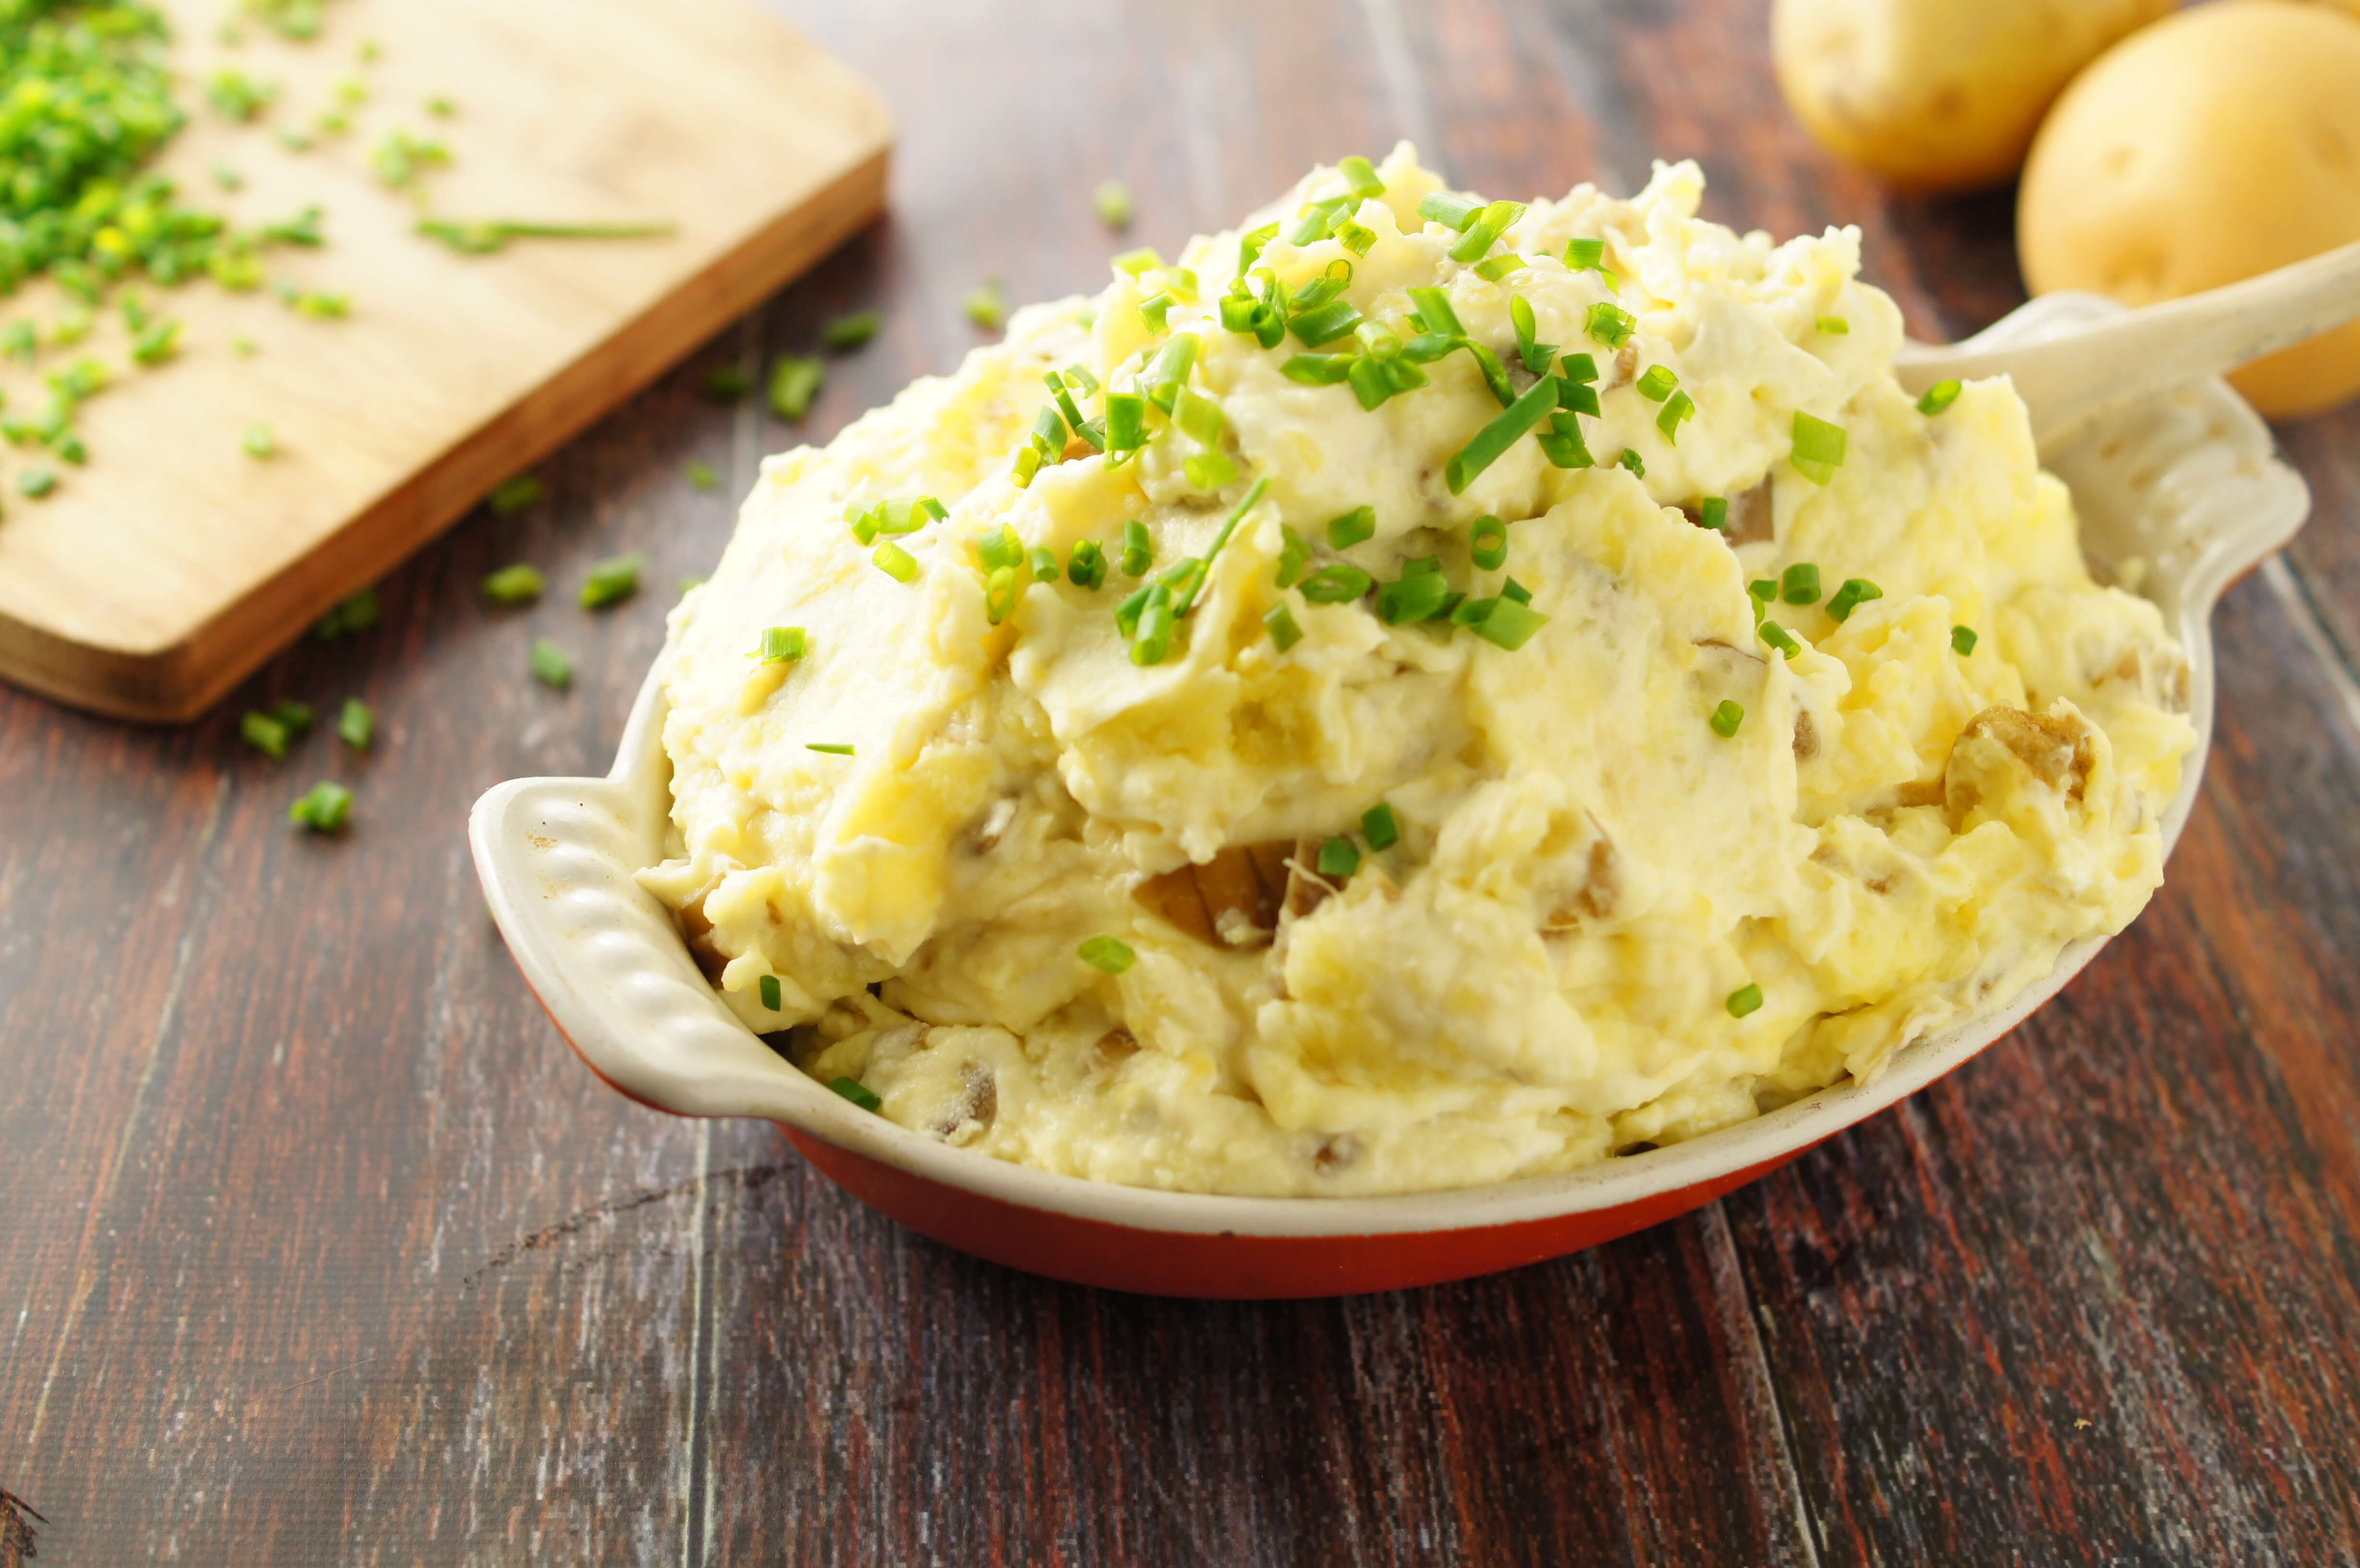 Sour Cream and Onion Mashed Potatoes Recipe - A Real Food Journey